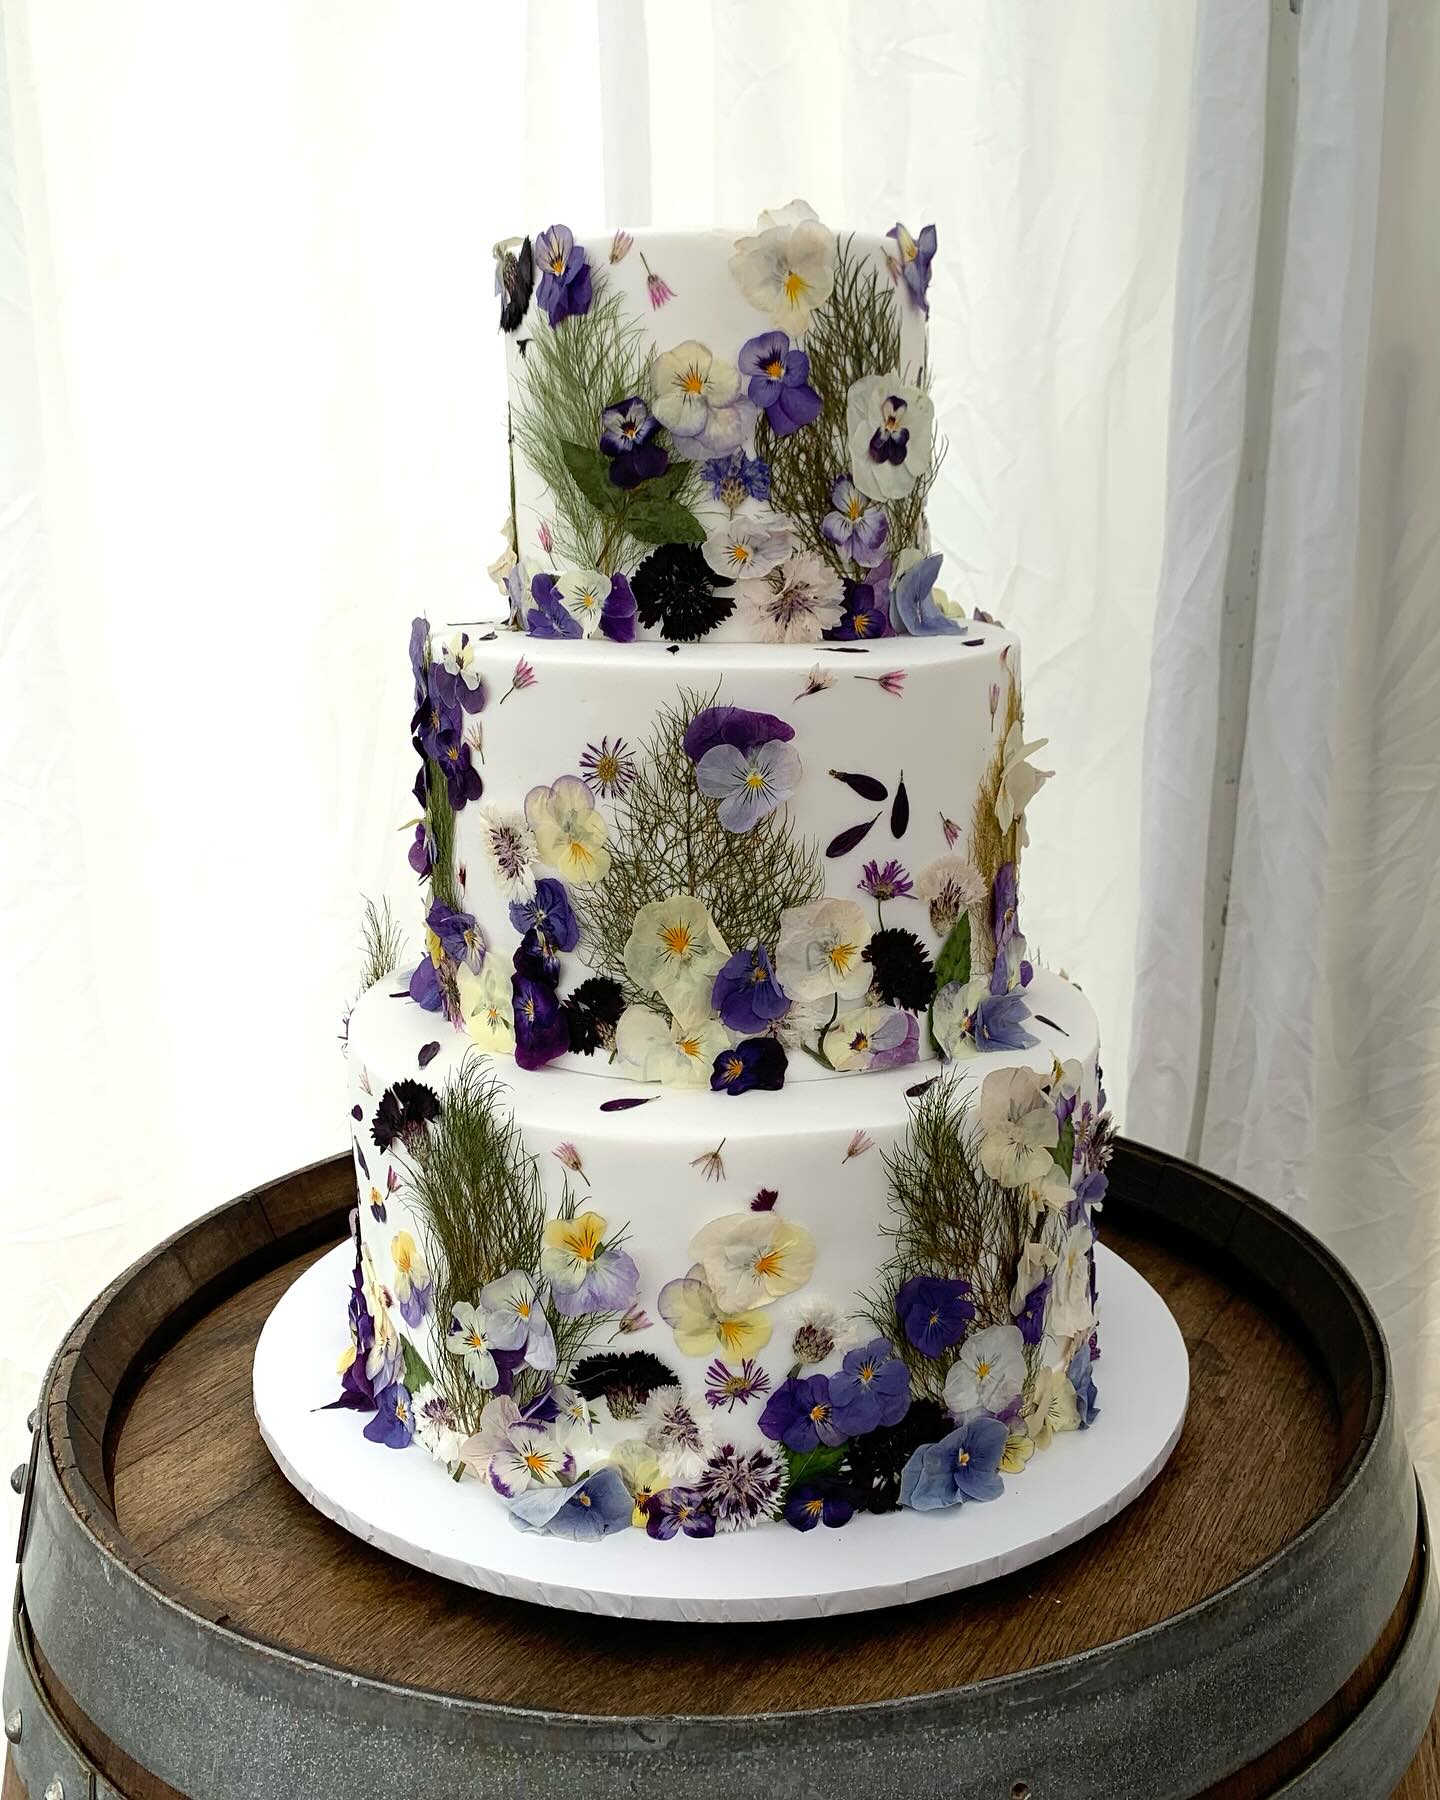 Weddings – The Baking Patch